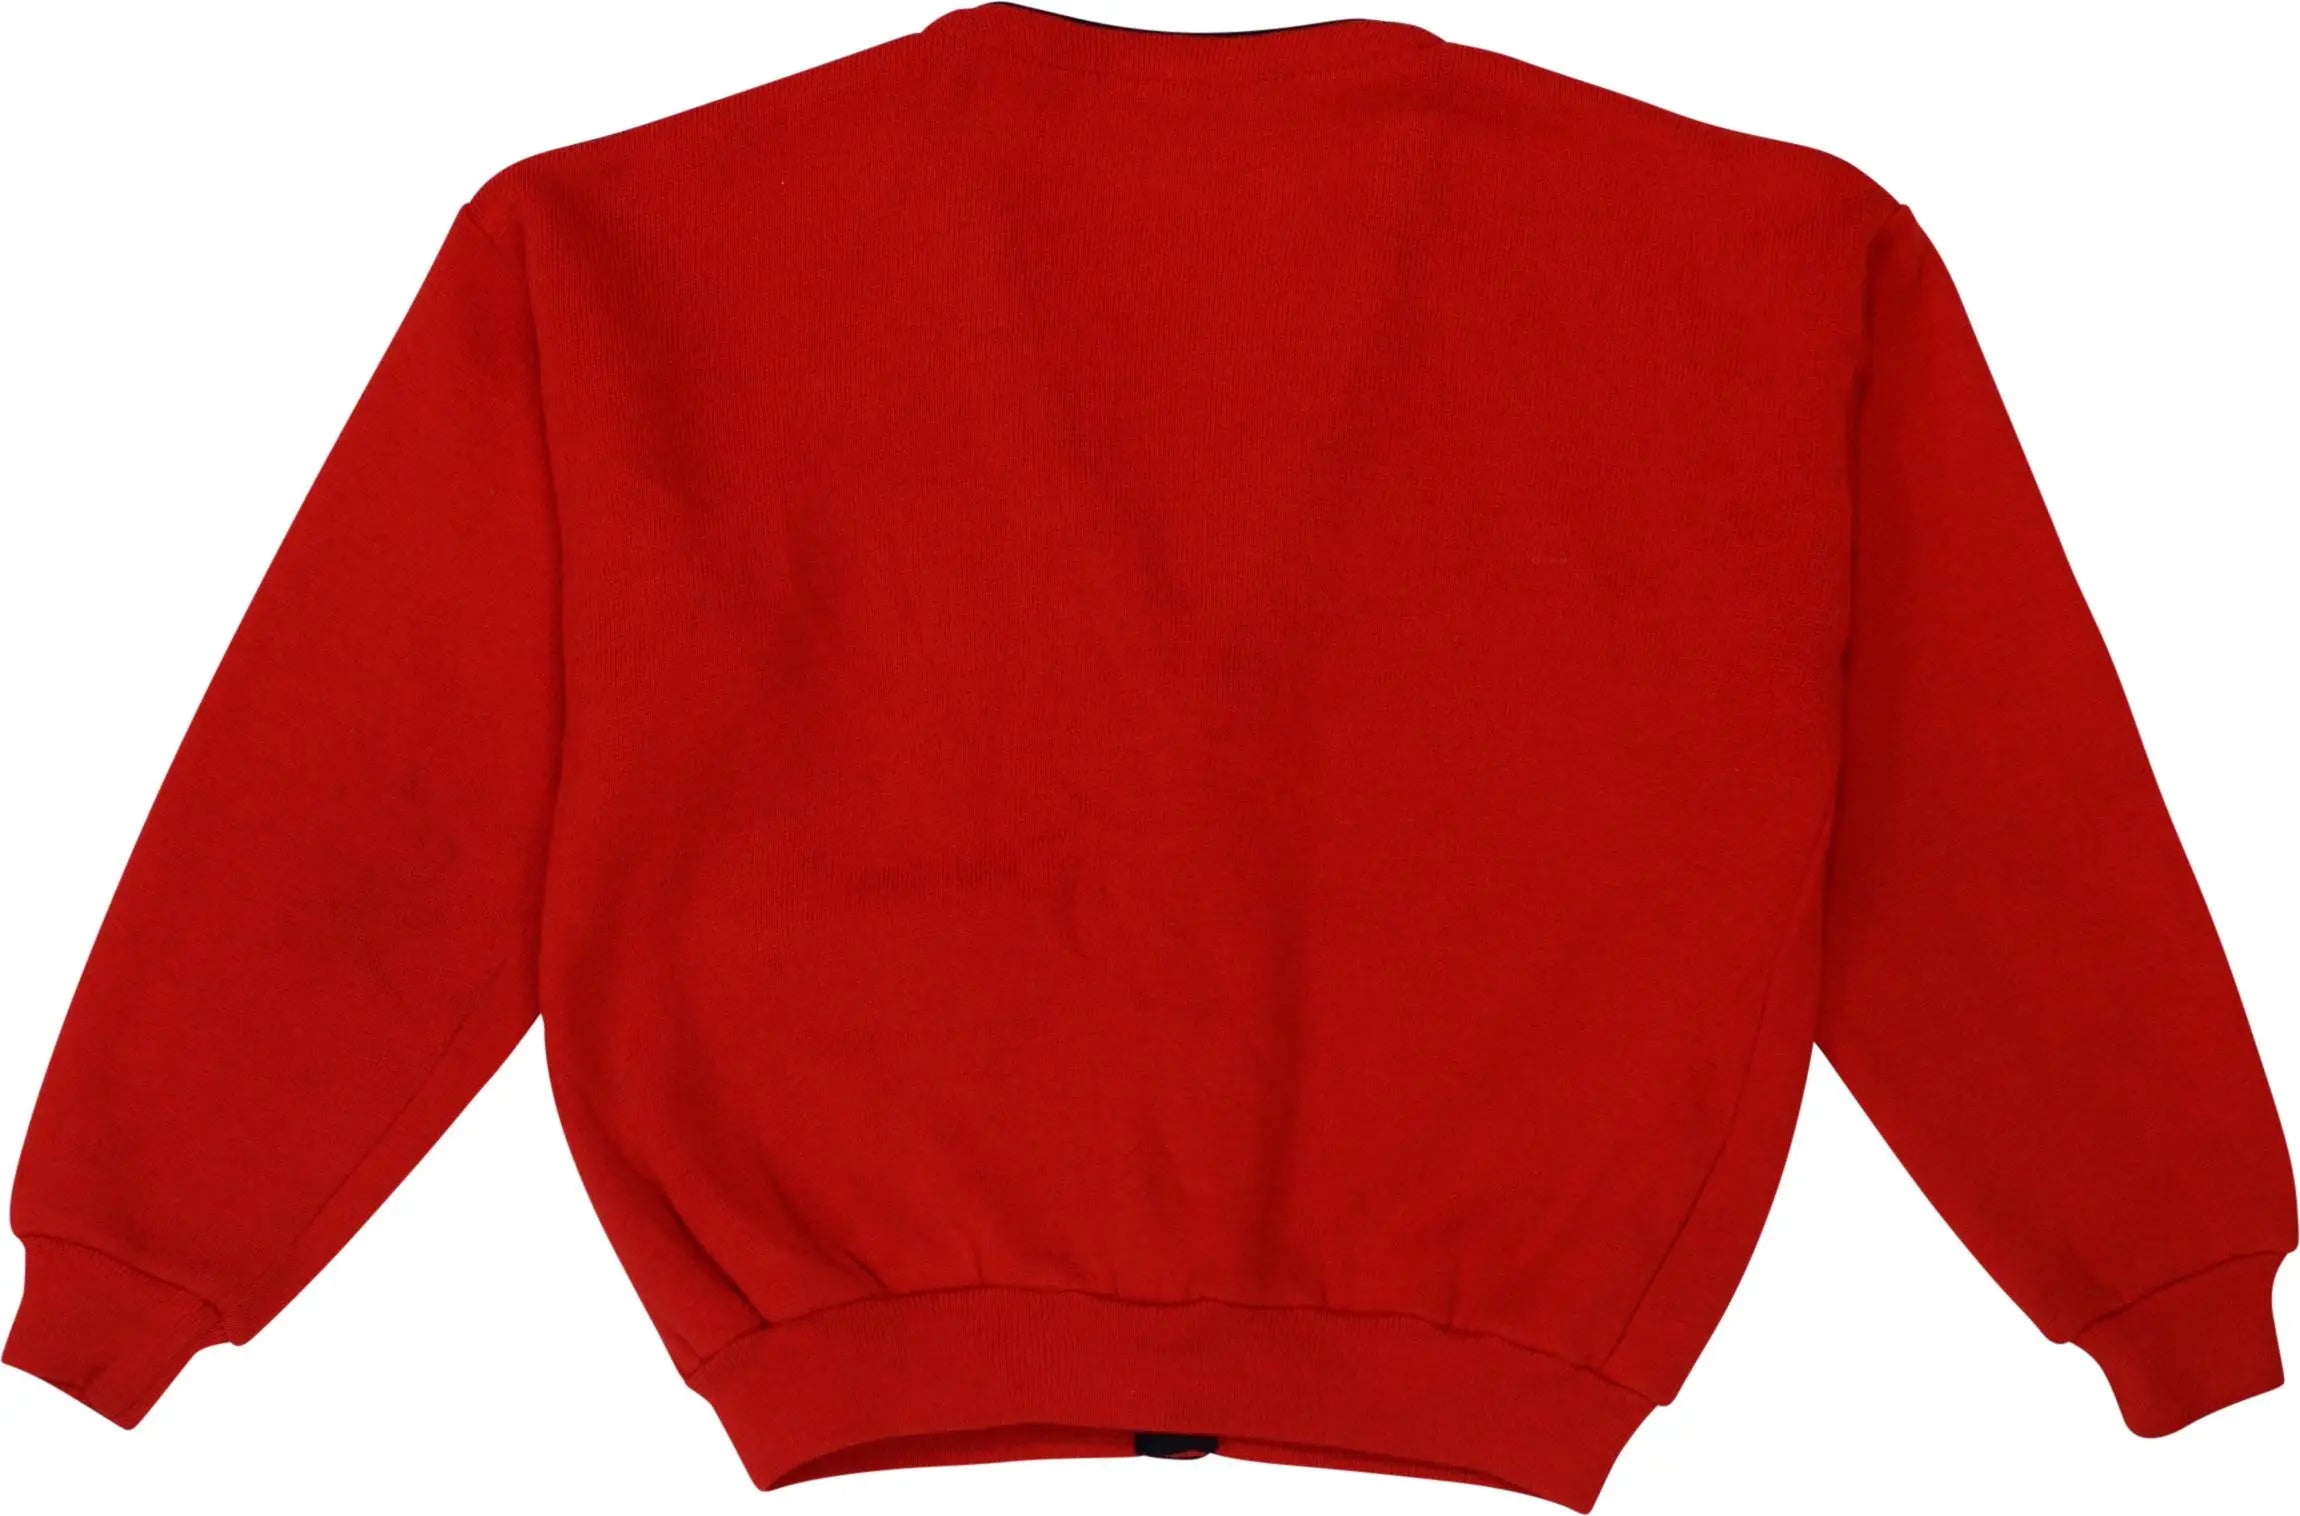 Lacoste - Red Wool Blend Cardigan by Lacoste- ThriftTale.com - Vintage and second handclothing